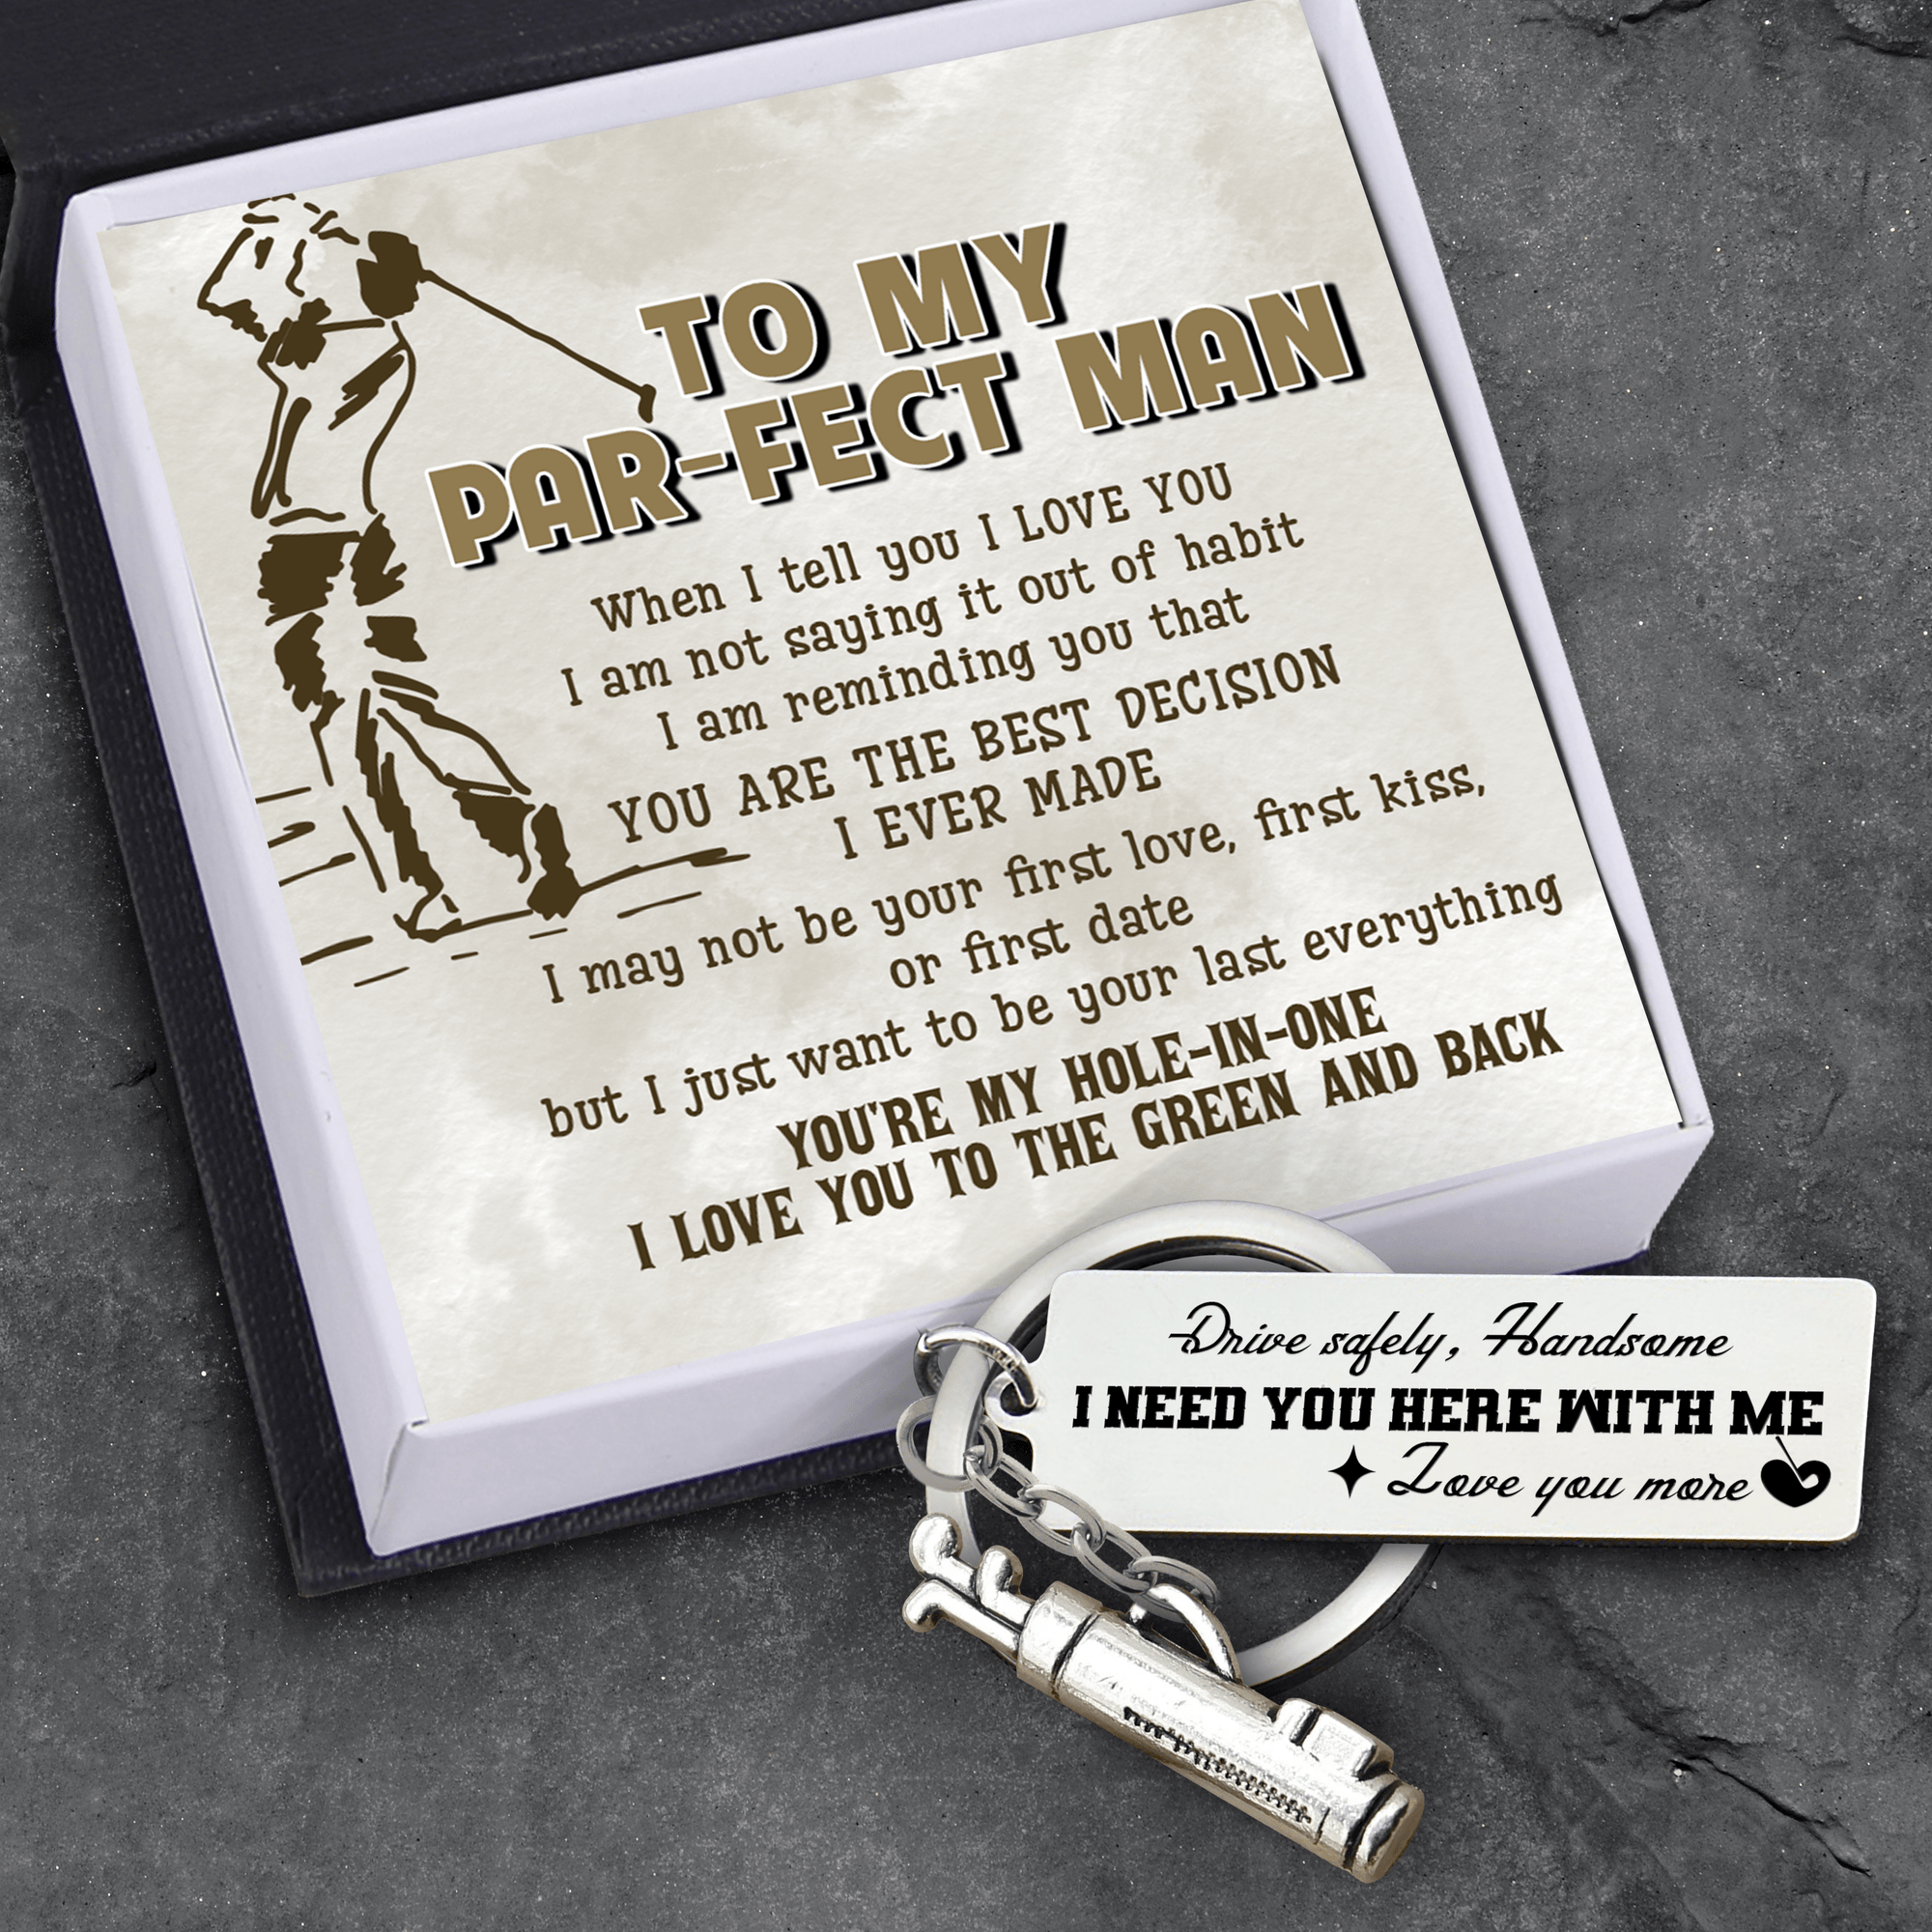 Golf Charm Keychain - Golf - To My Par-fect Man - You Are The Best Decision I Ever Made - Gkzp26004